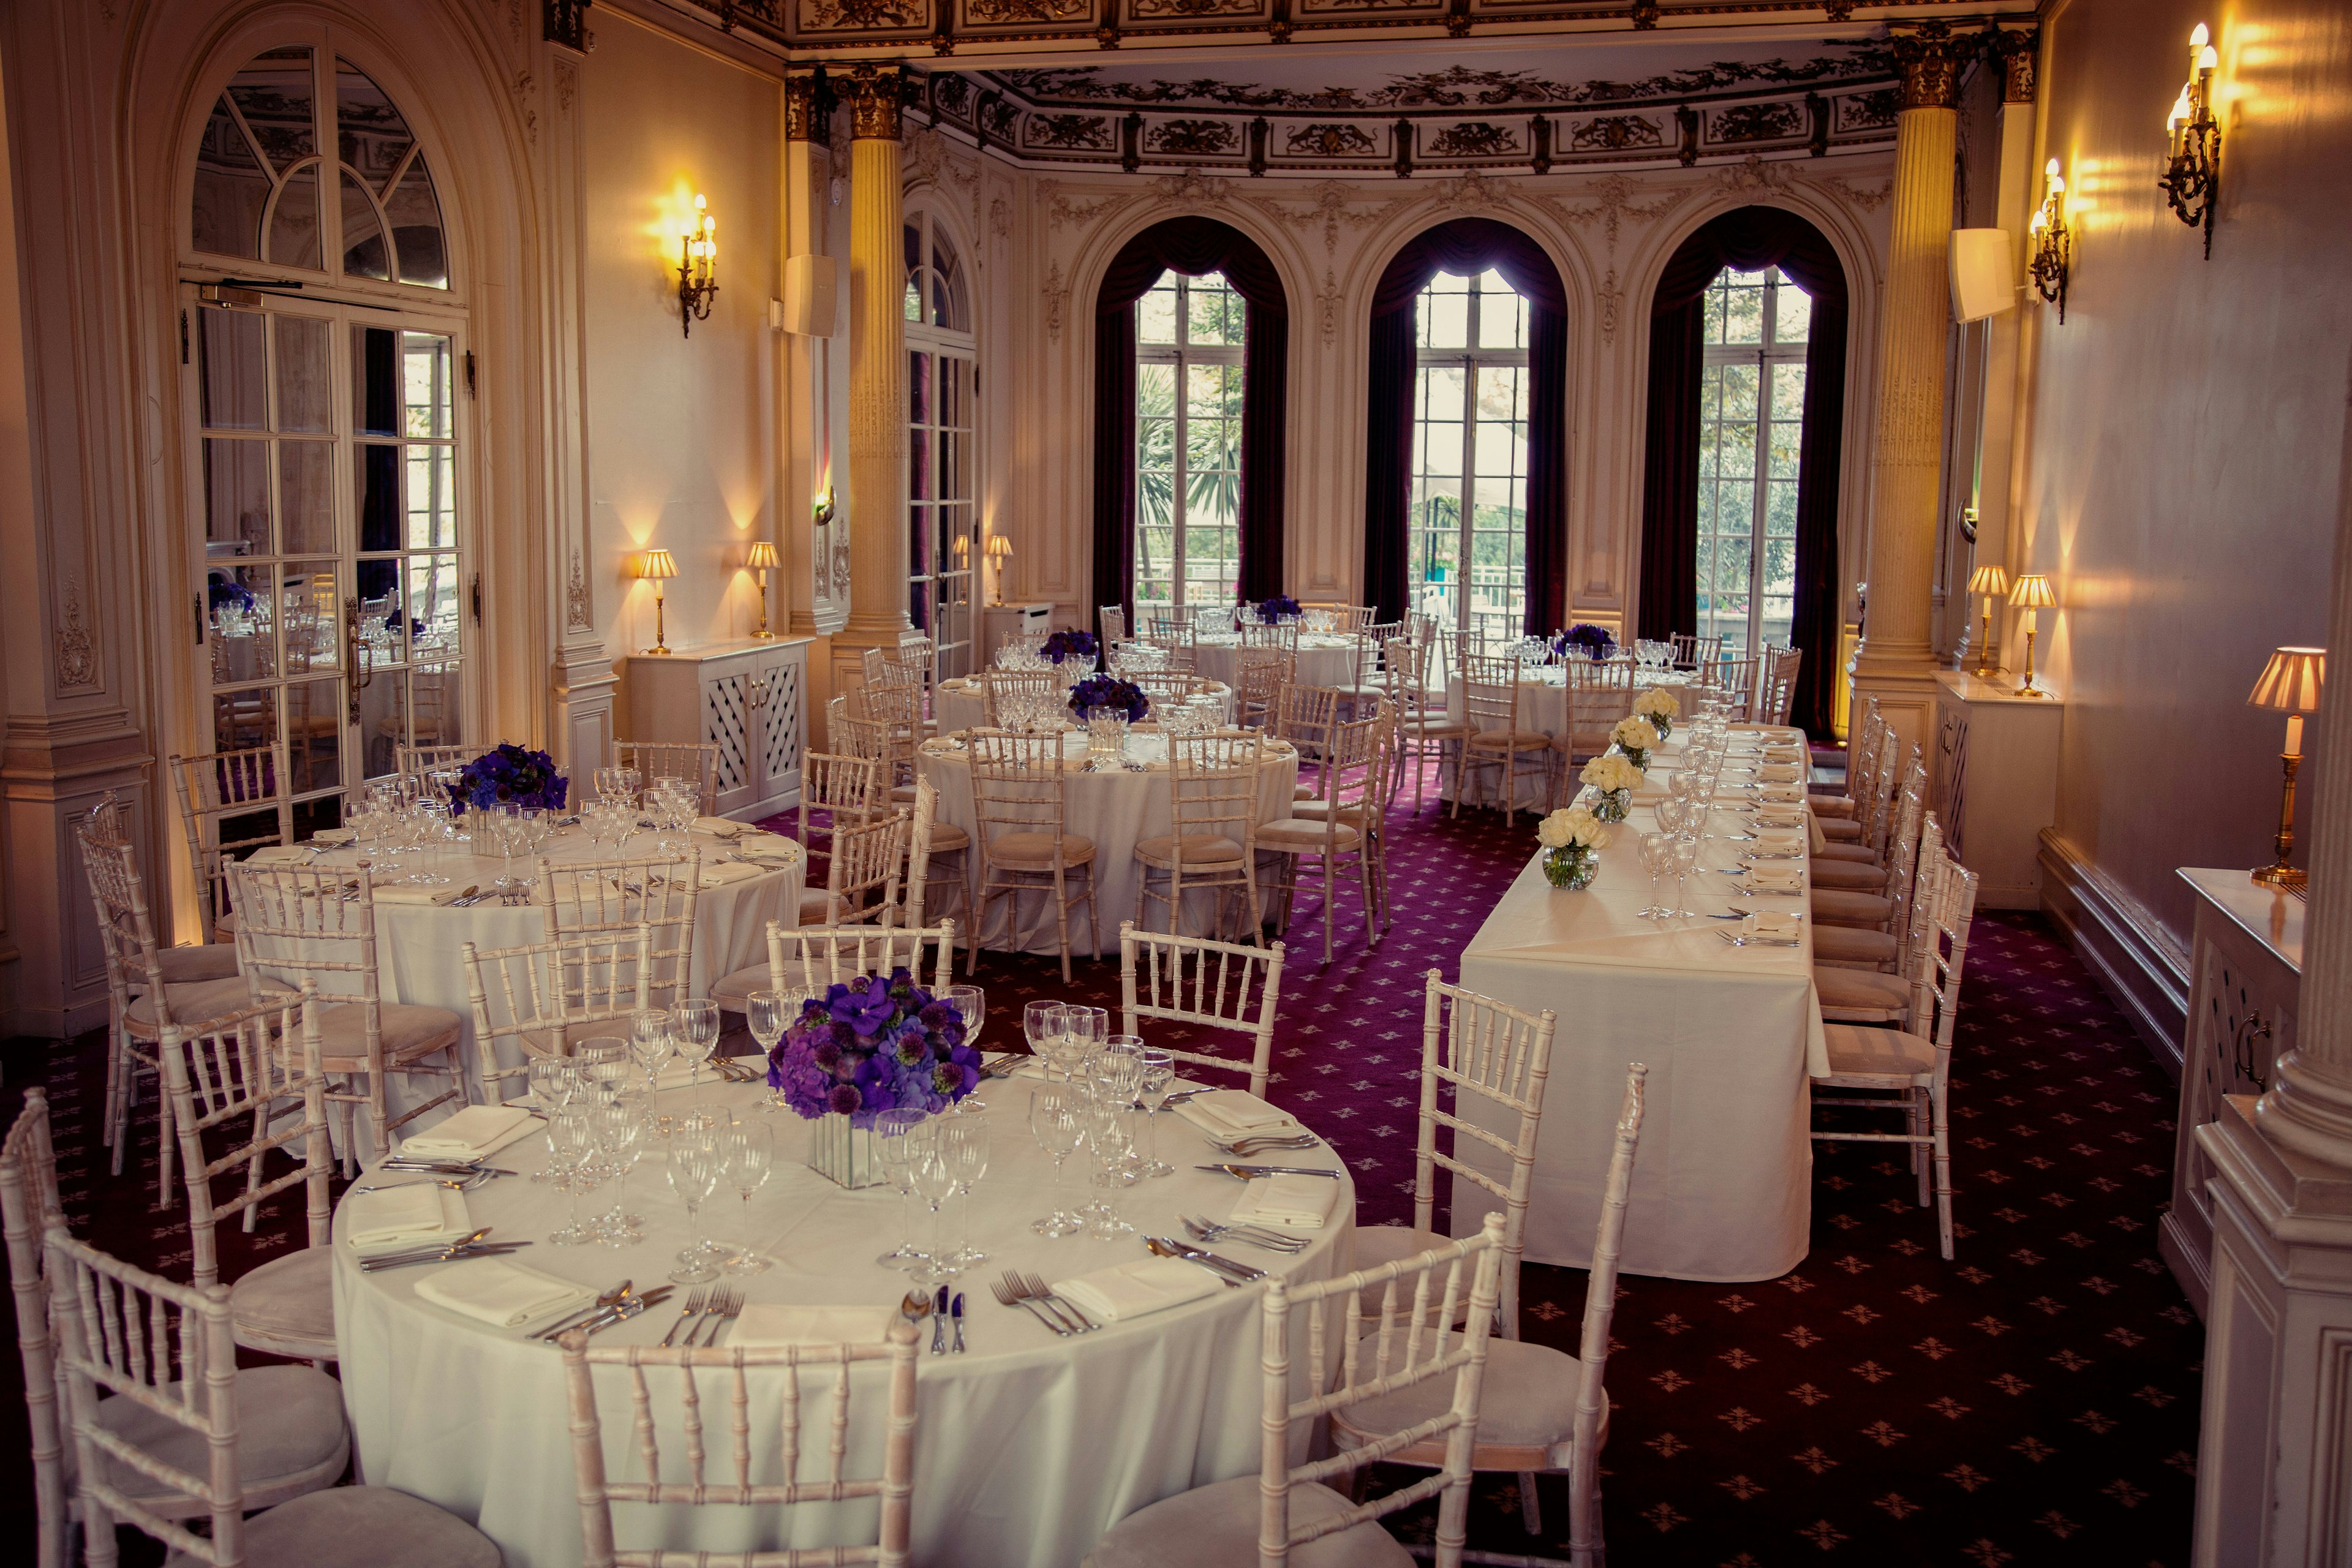 Wedding Venues - No. 4 Hamilton Place - Weddings in Argyll Room and Terrace - Banner